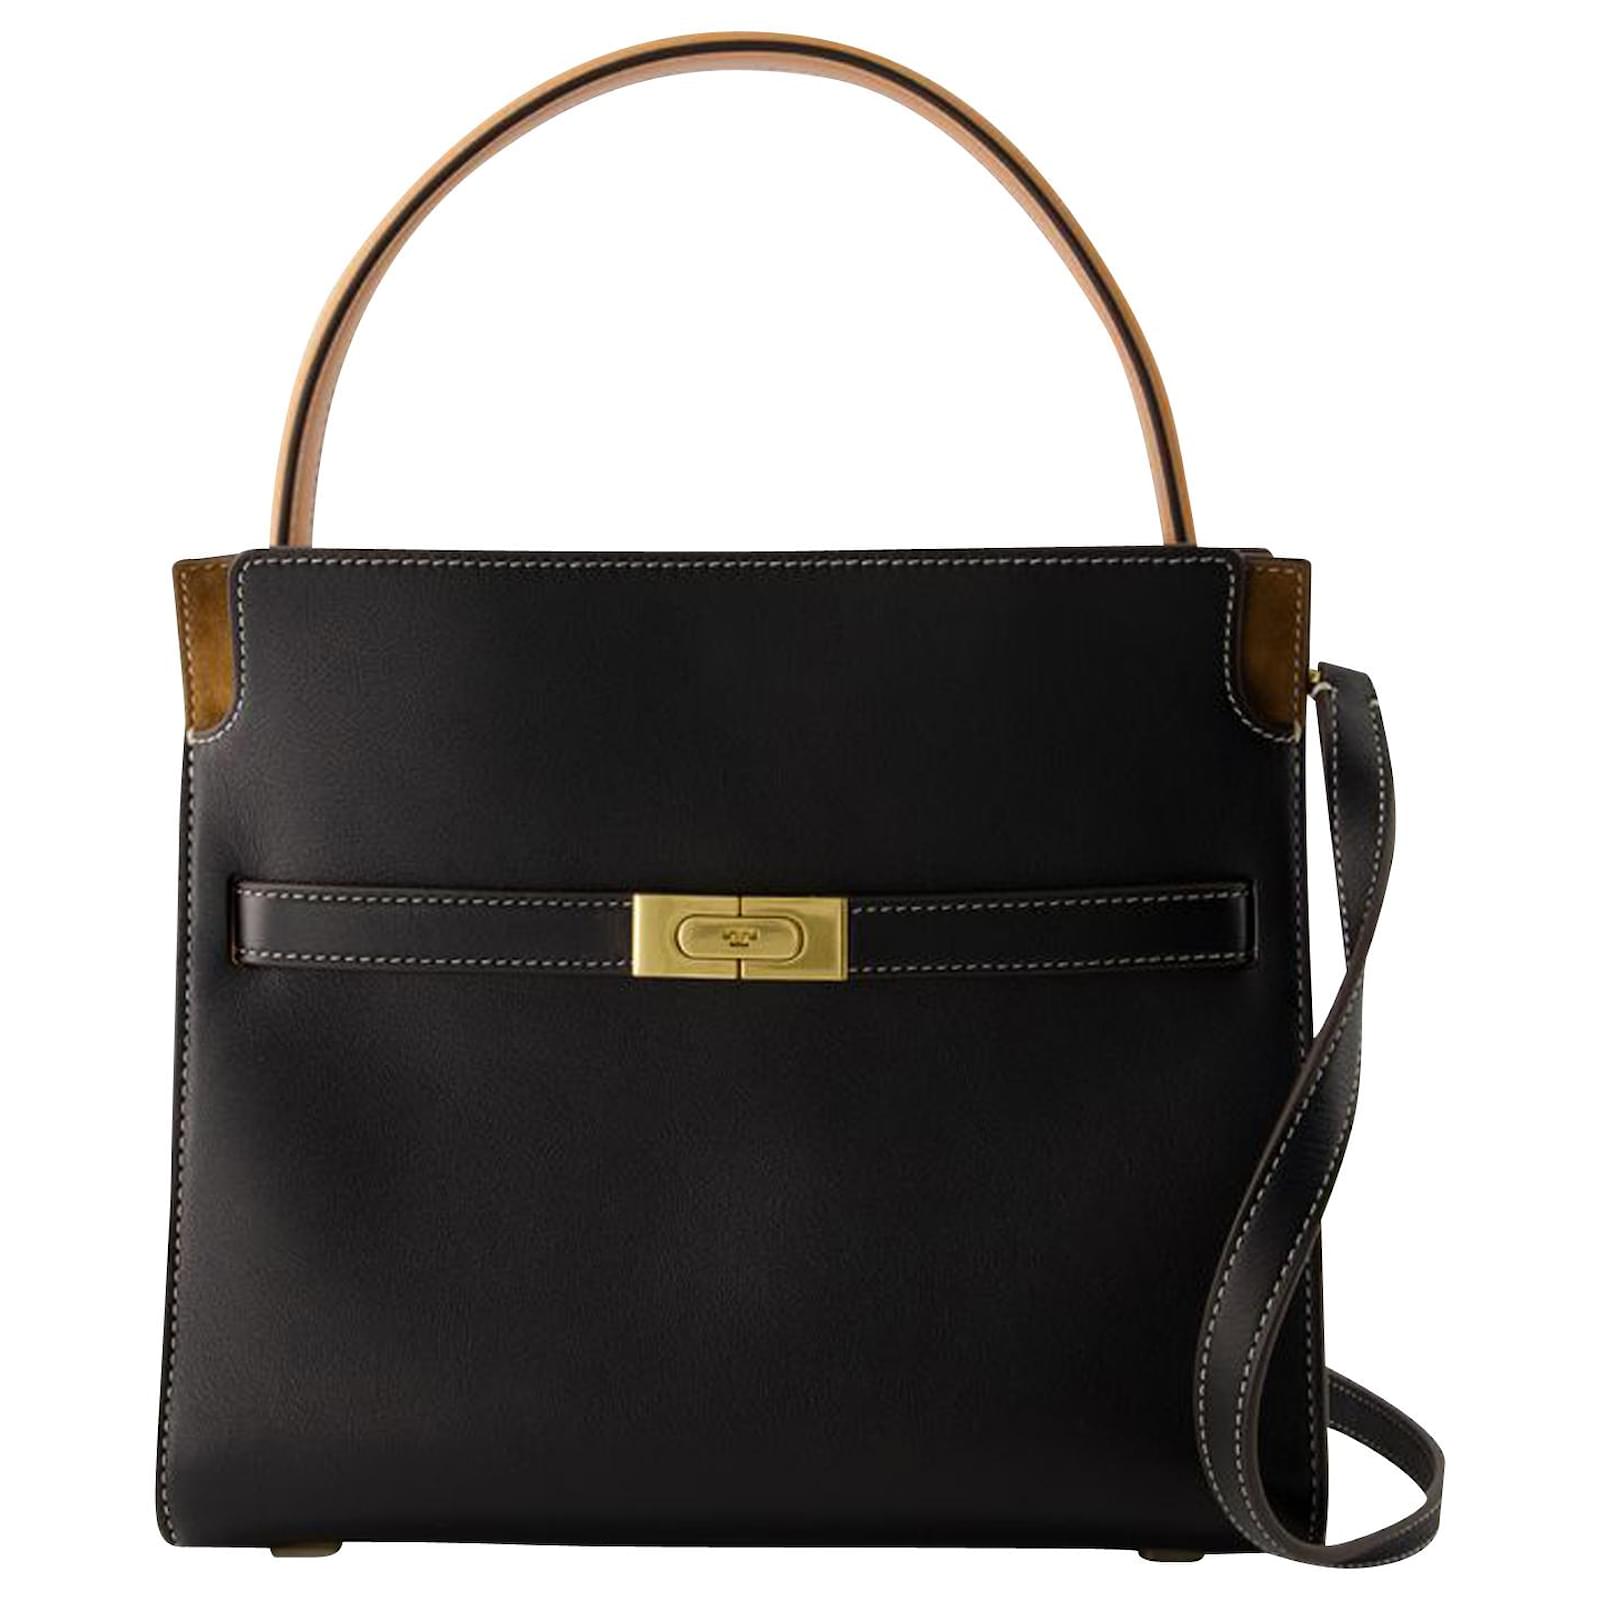 Tory Burch 140987 Britten Black Pebbled Leather With Gold Hardware Small  Women's Adjustable Shoulder Bag: Handbags: Amazon.com